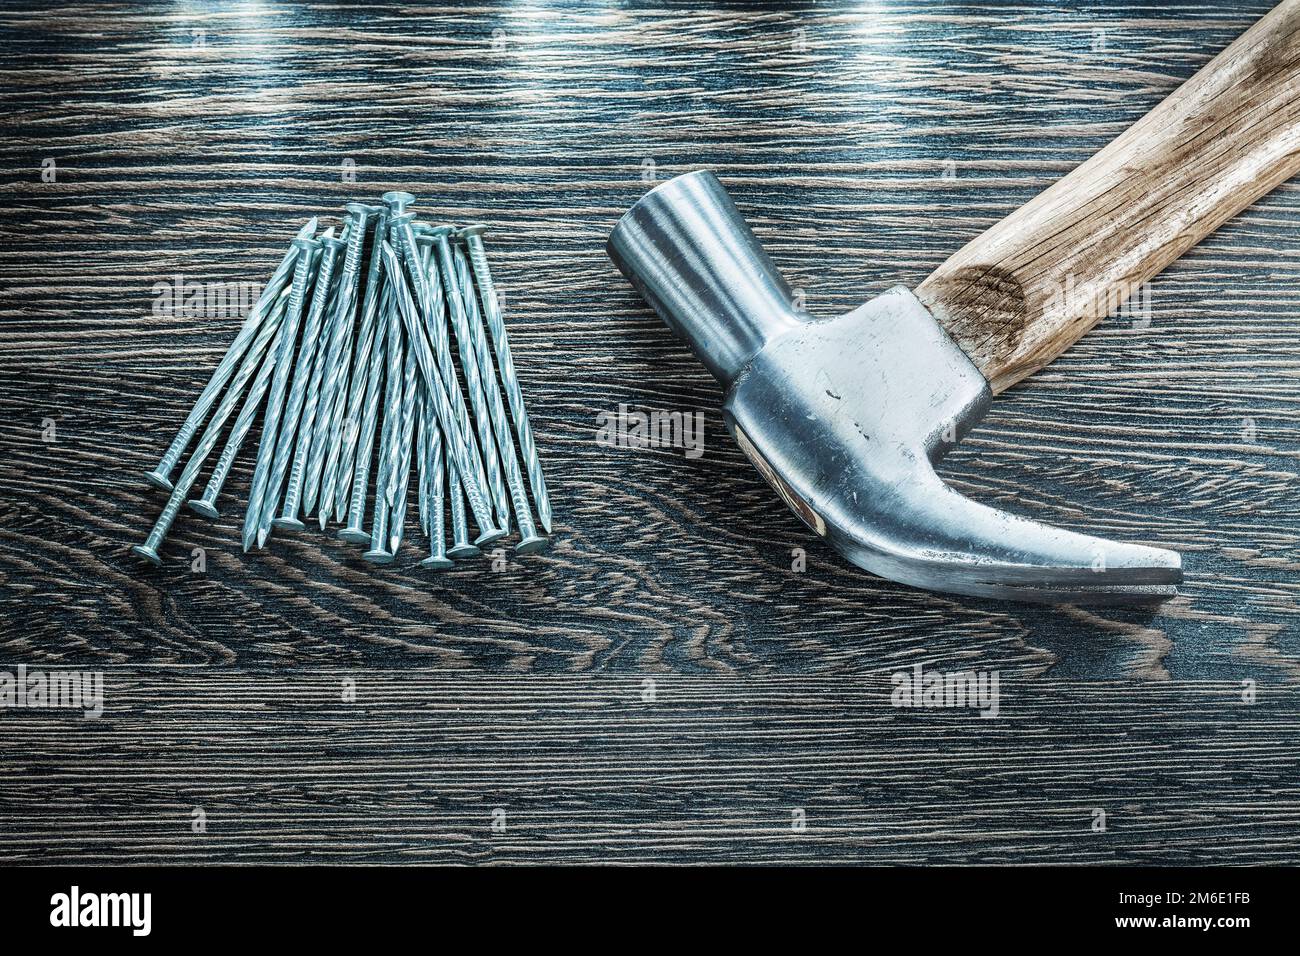 Construction nails claw hammer on wooden board. Stock Photo